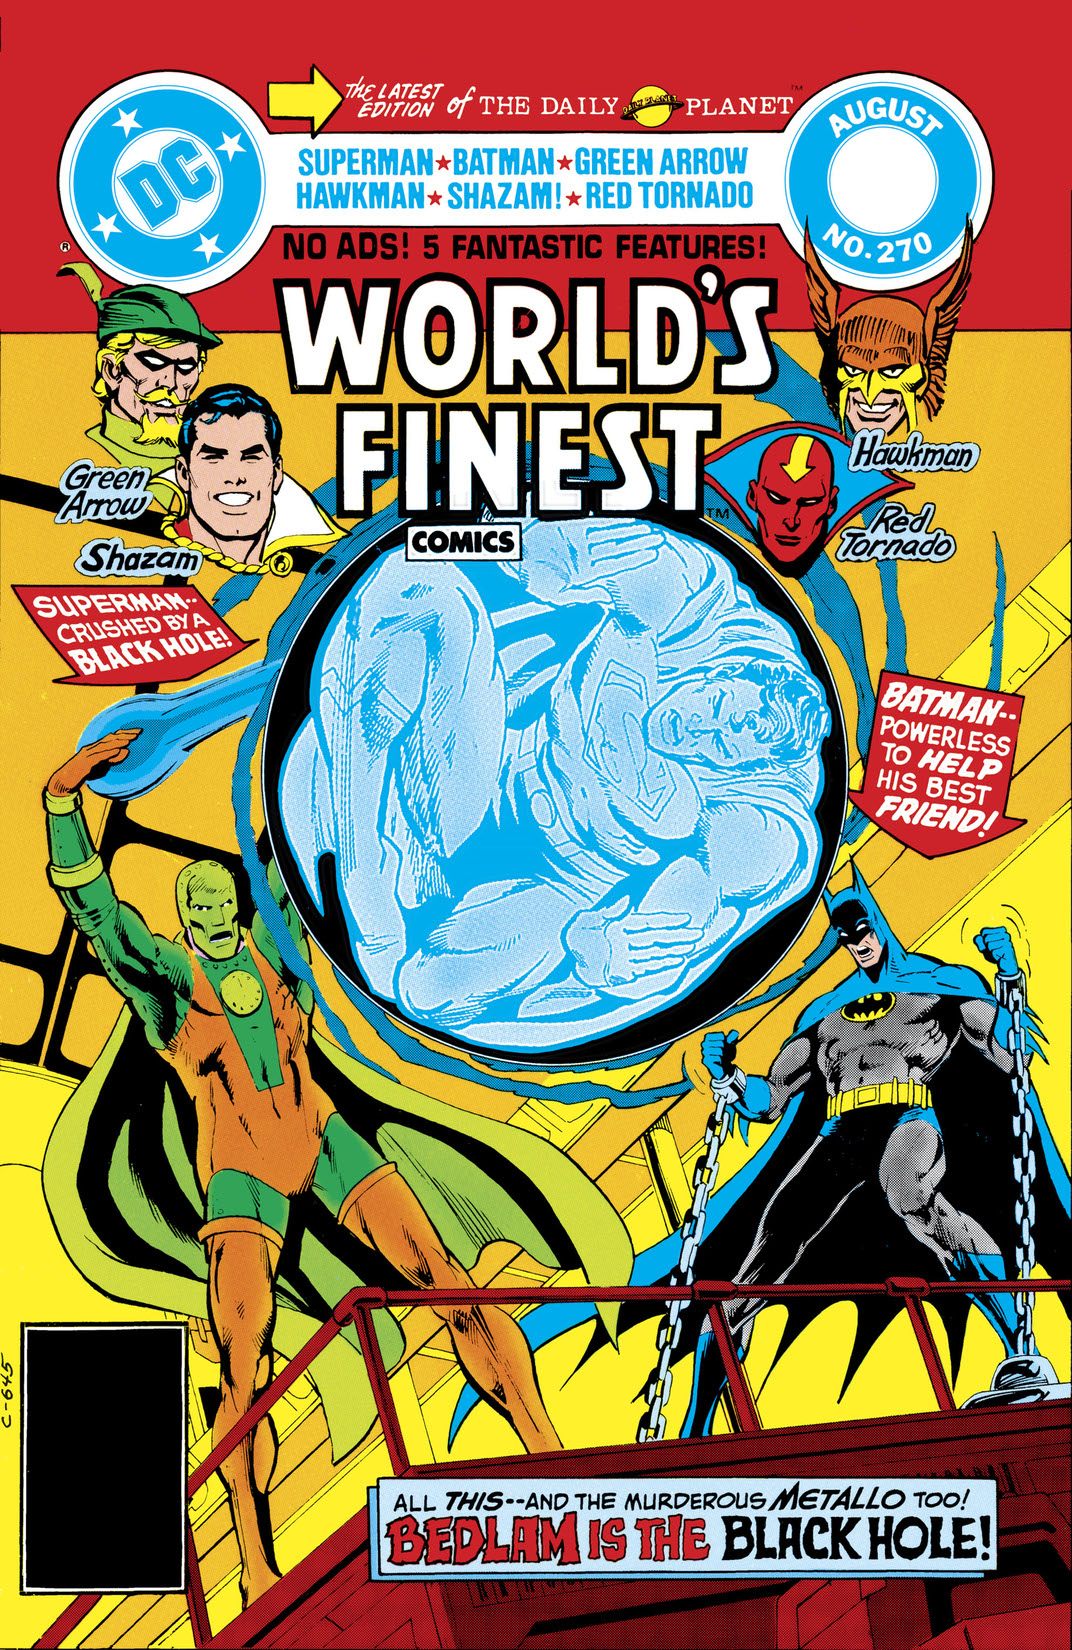 World's Finest Comics (1941-) #270 preview images